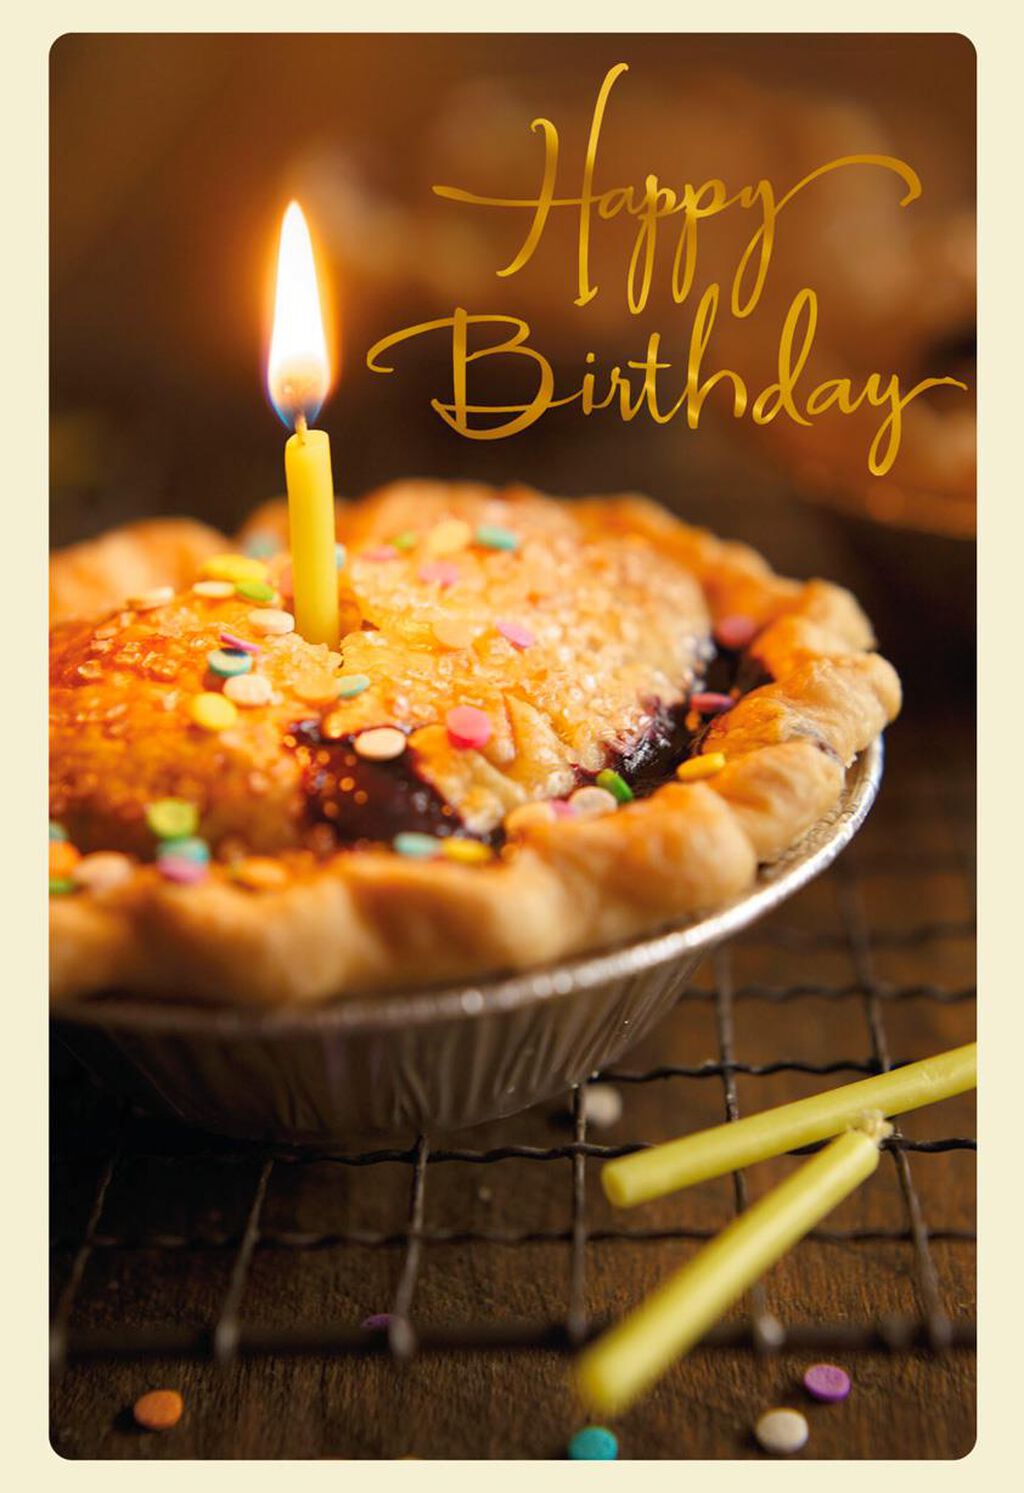 Pie-With-Candle-Celebrating-You-Birthday-Card-root-239LGH1032_PV.1.LGH1032.jpg_Source_Image.jpg